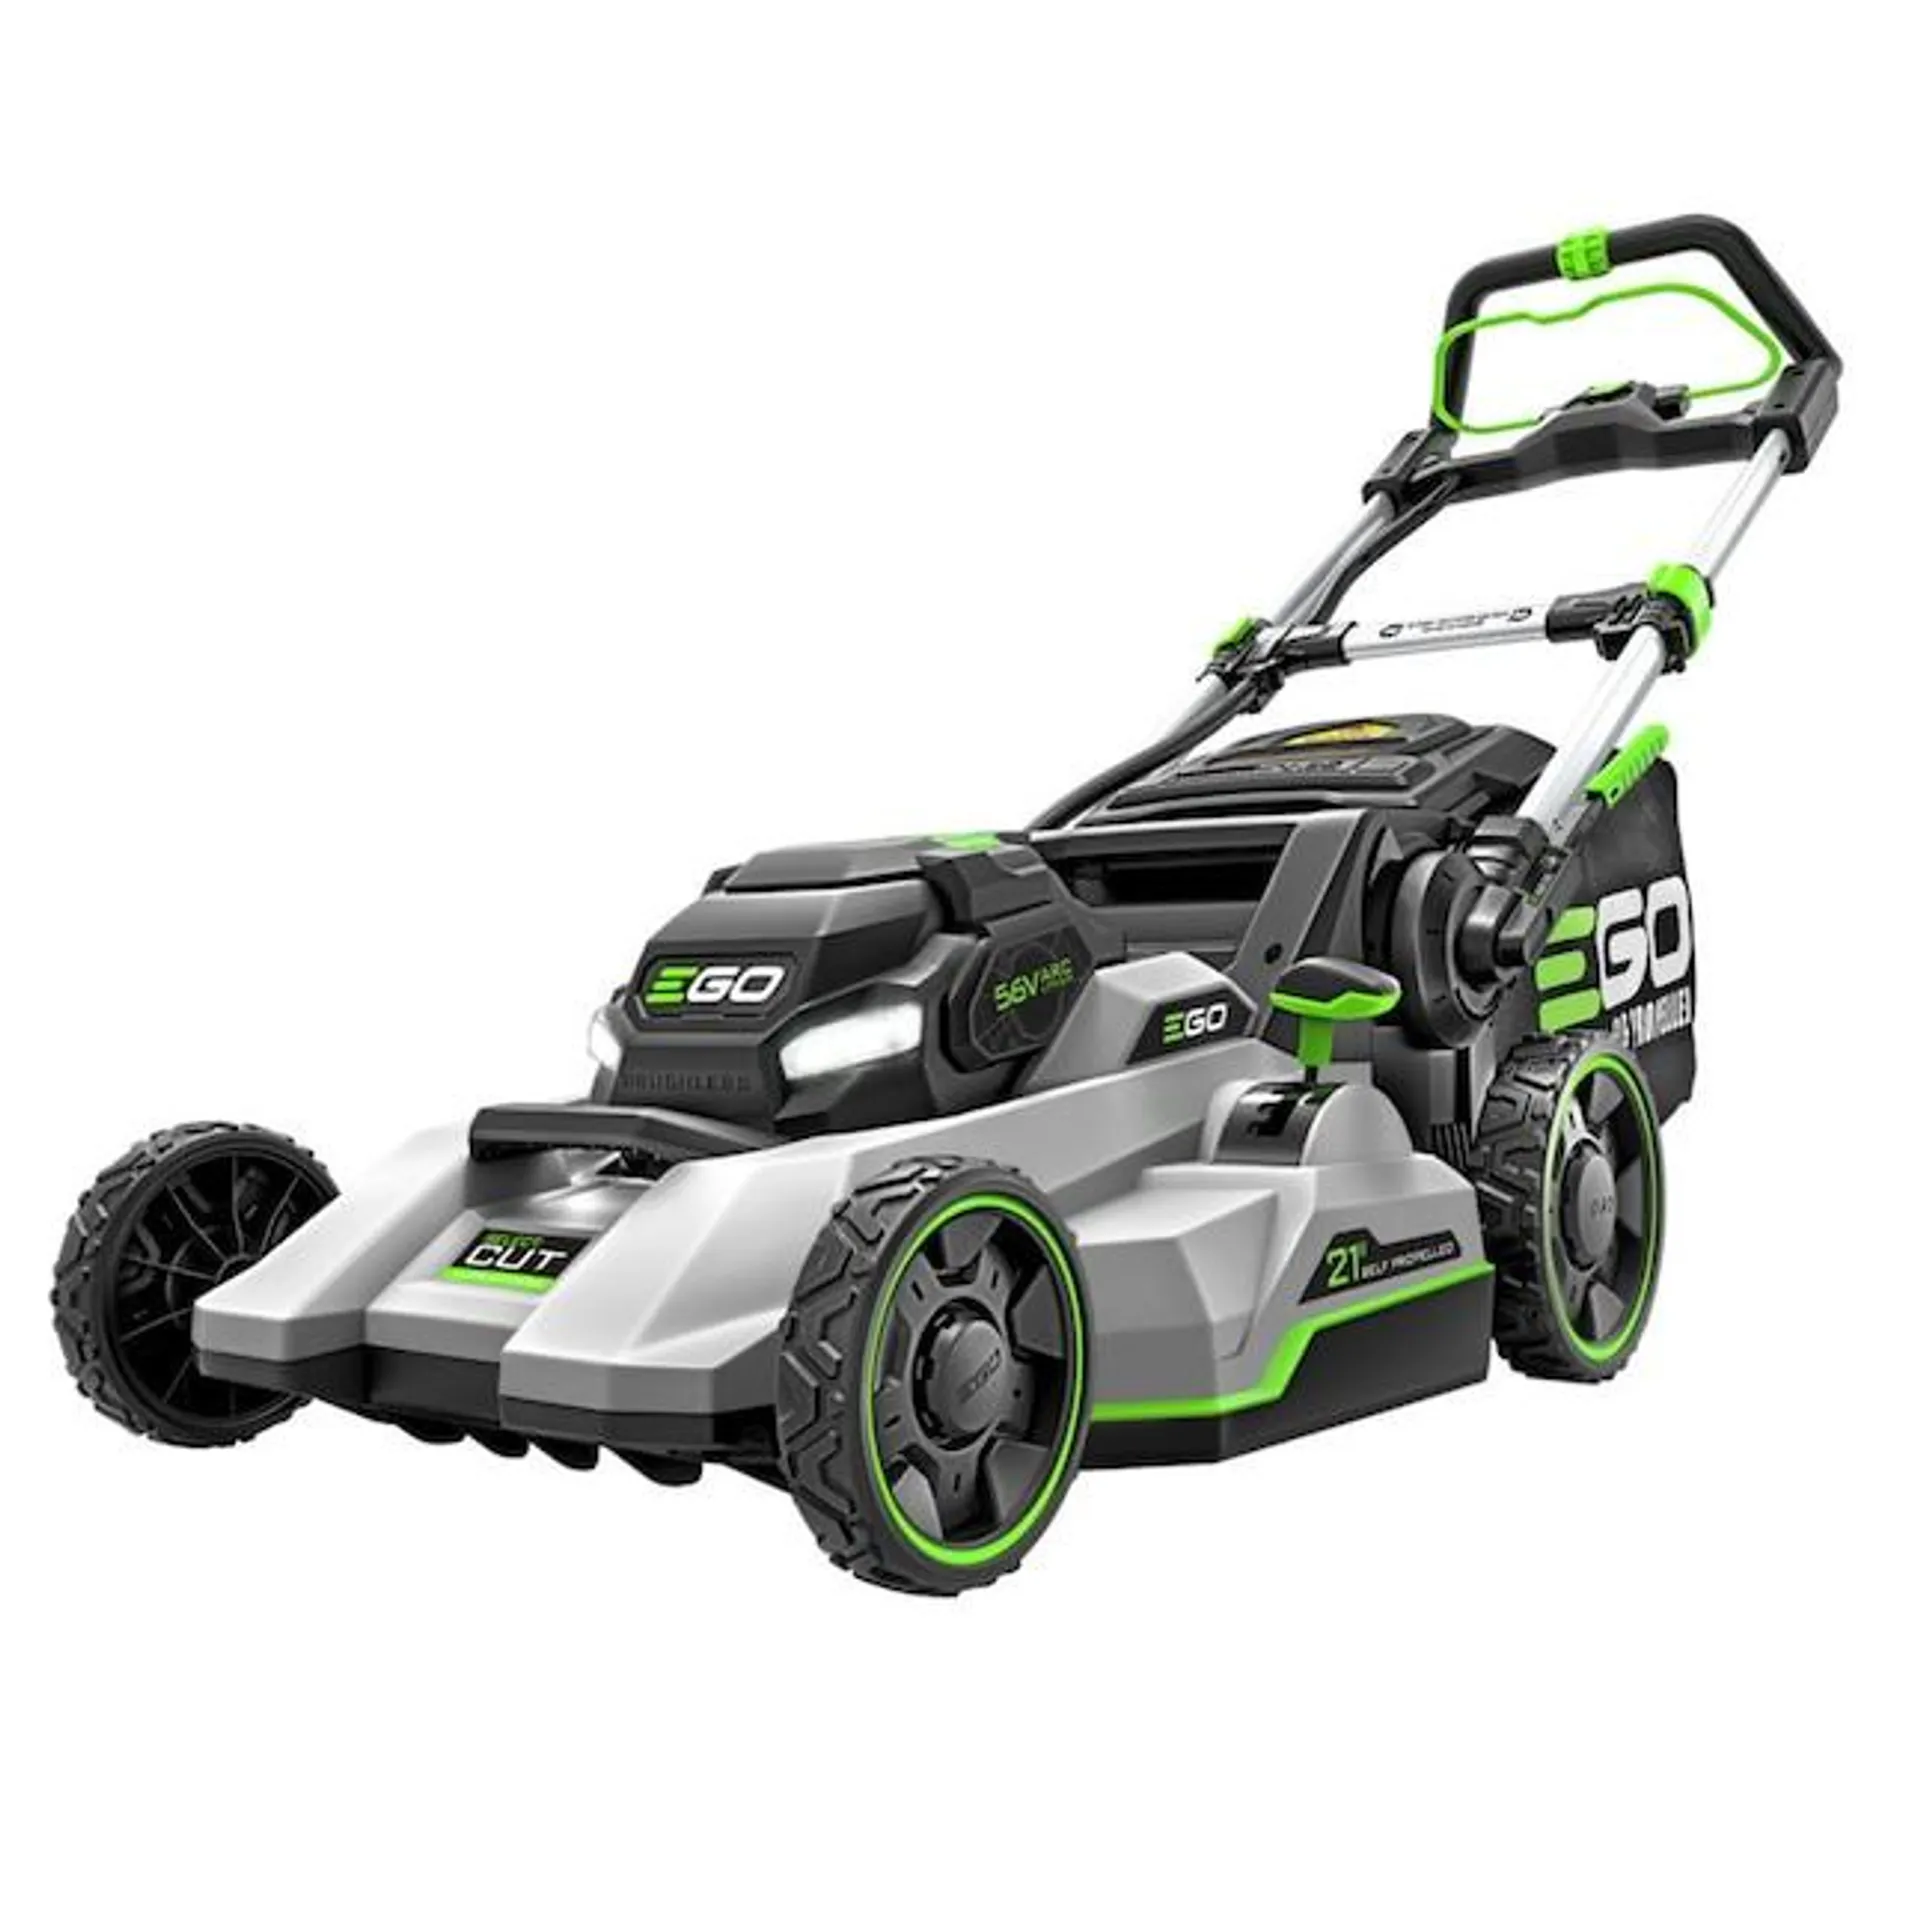 EGO POWER+ Select Cut 56-volt 21-in Cordless Self-propelled Lawn Mower 7.5 Ah (1-Battery and Charger Included)